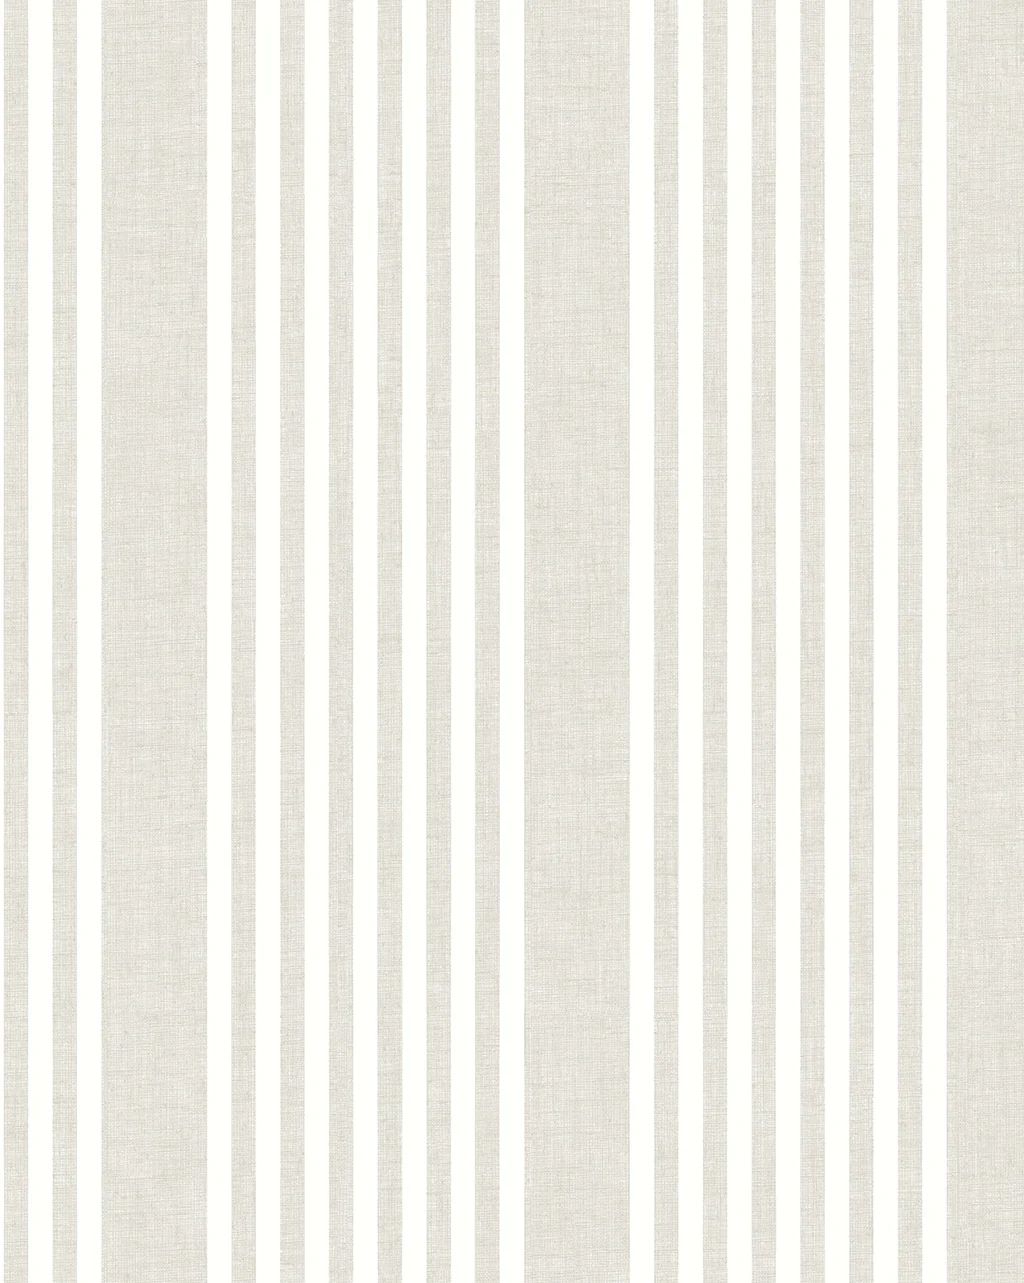 Ayla Striped Wallpaper | McGee & Co.